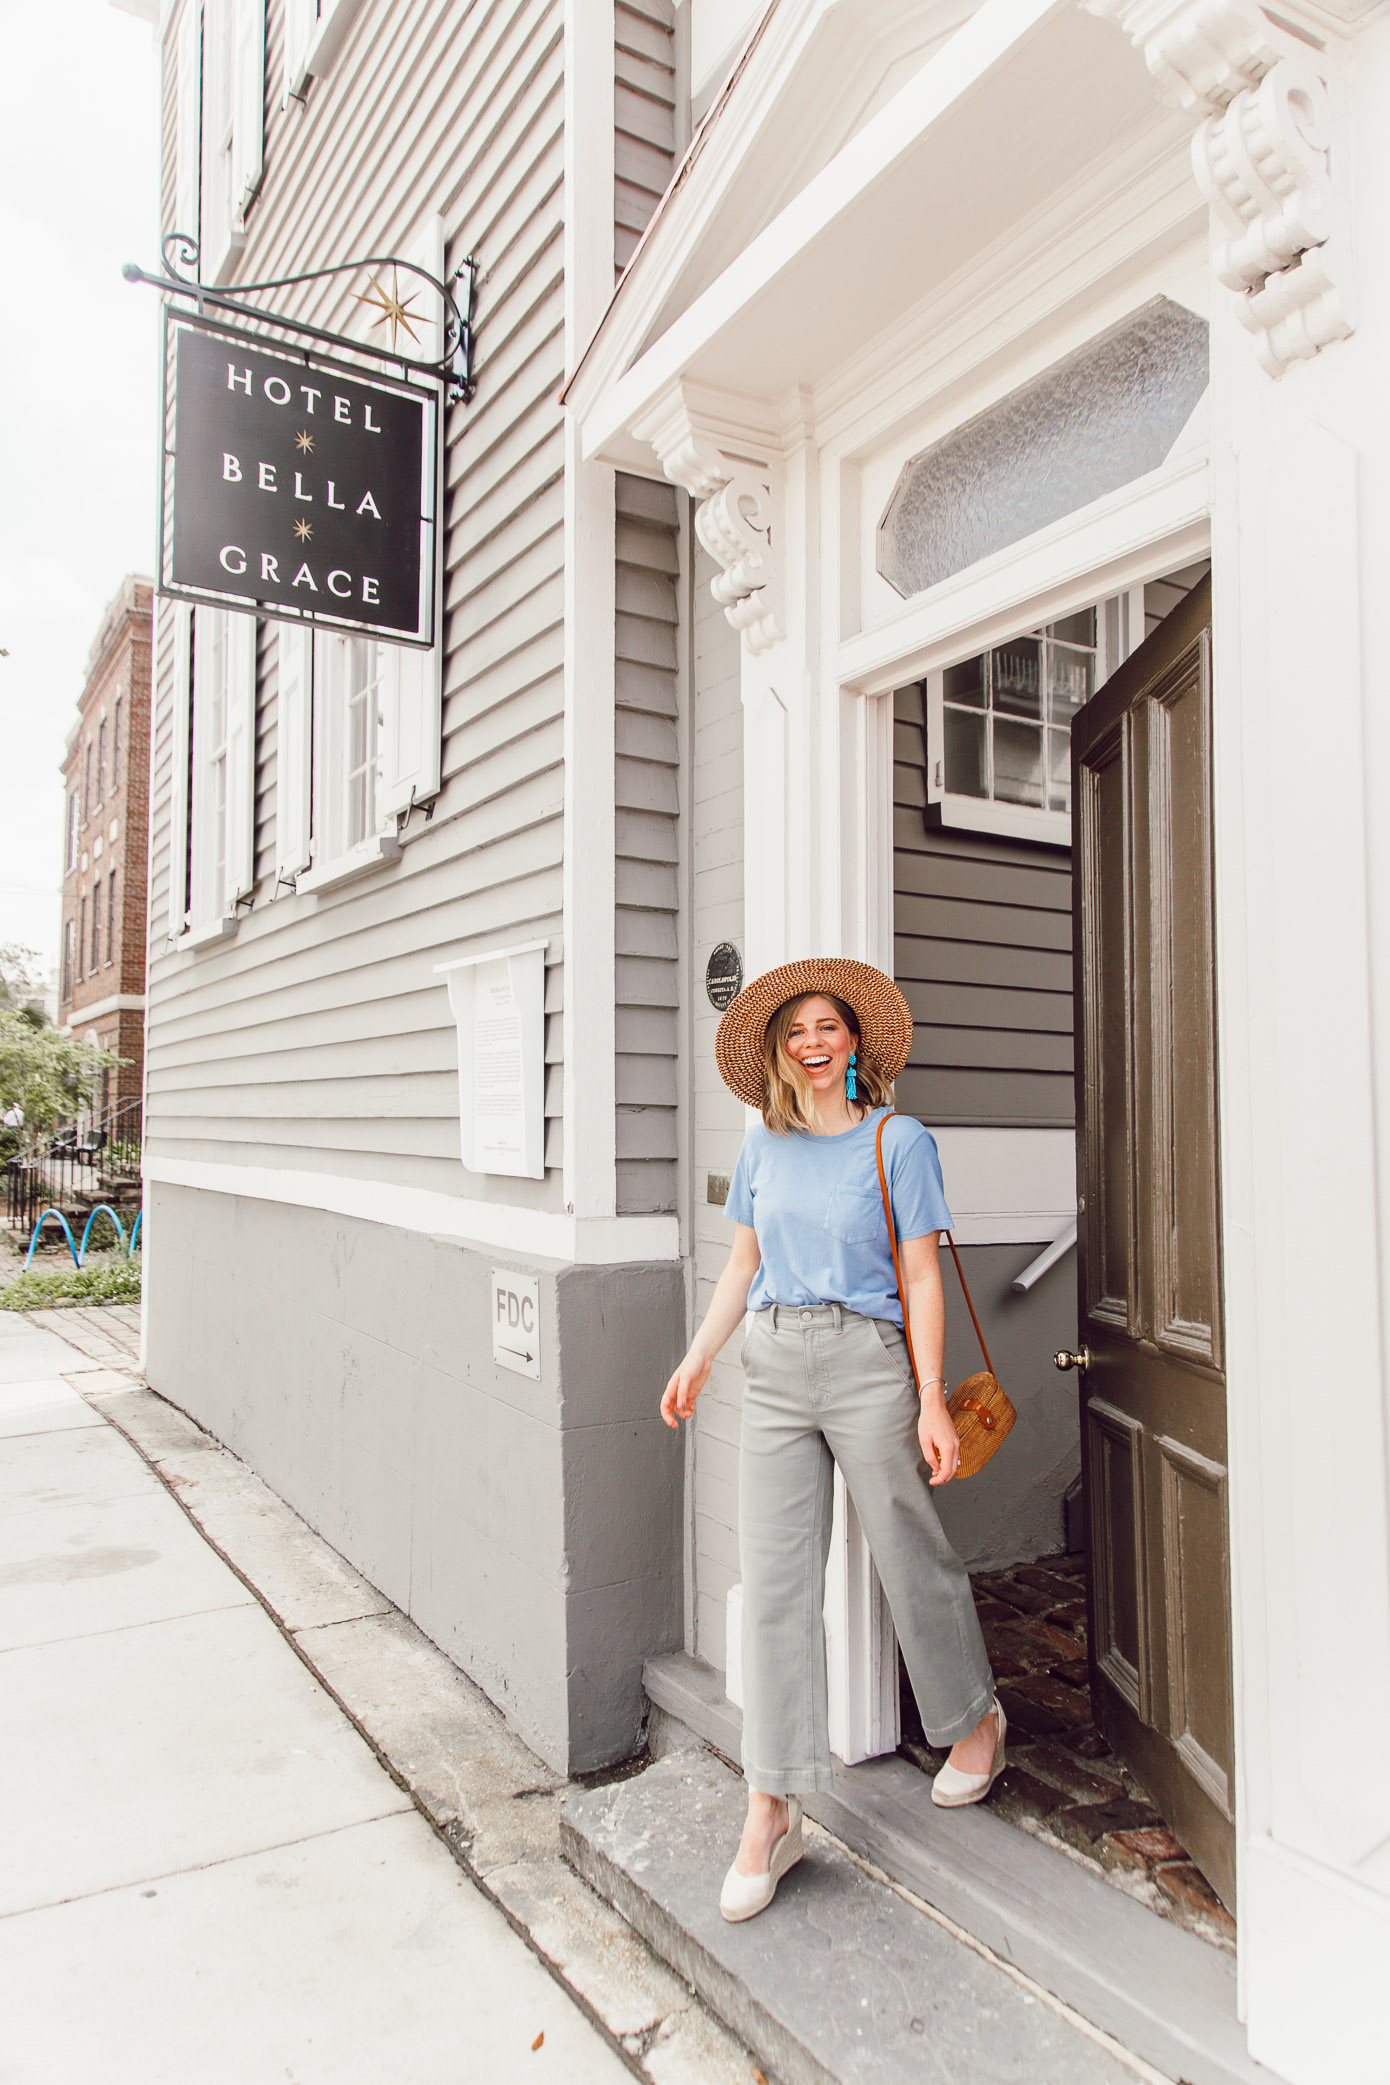 Hotel Bella Grace Charleston Review | Where to Stay in Charleston, Charleston Boutique Hotels | Louella Reese